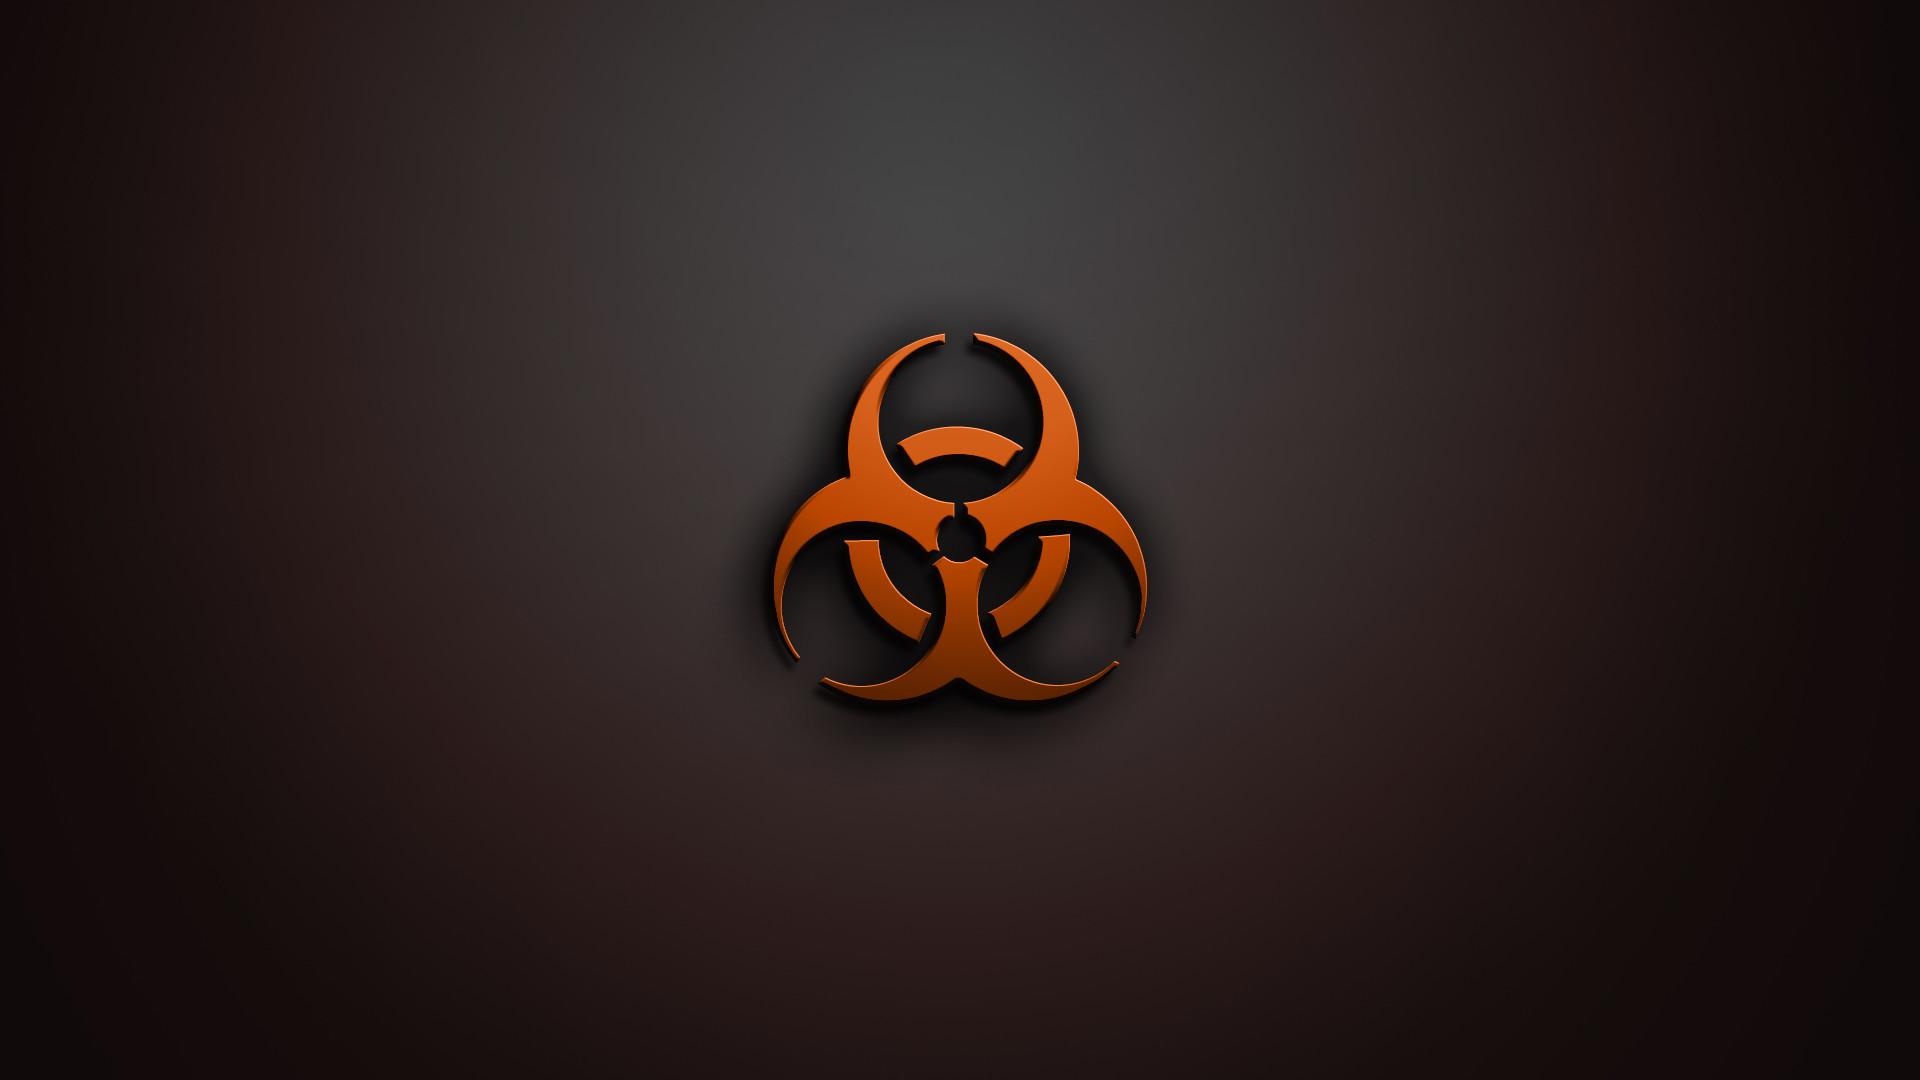 Radioactive Symbol Wallpaper background picture